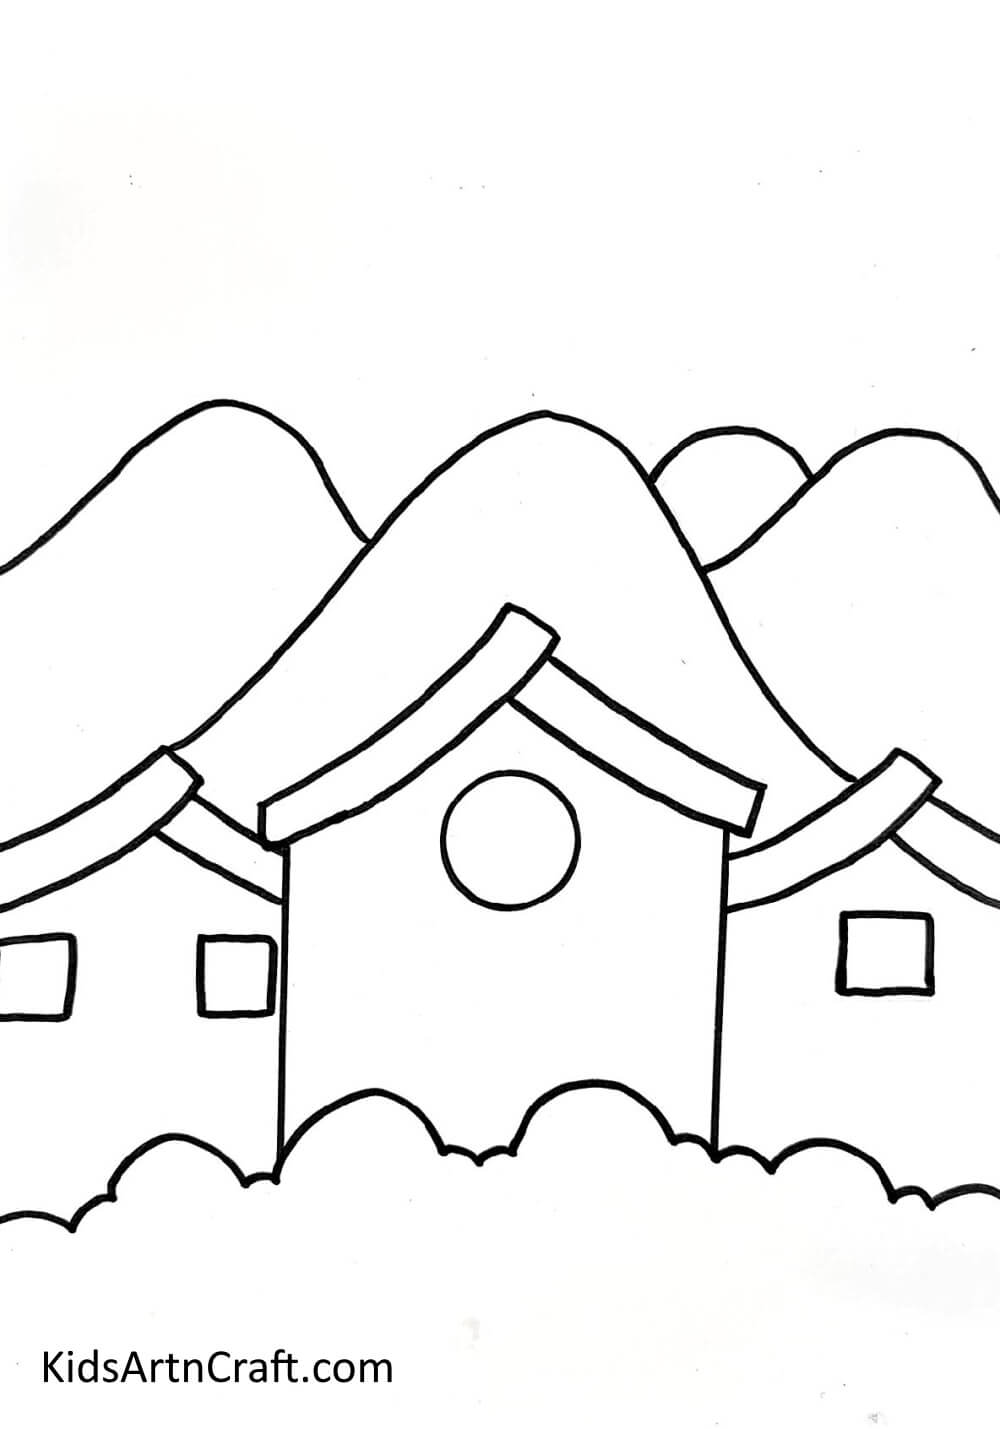 Drawing Mountains - Creating Pretty Landscapes For Newcomers To Art